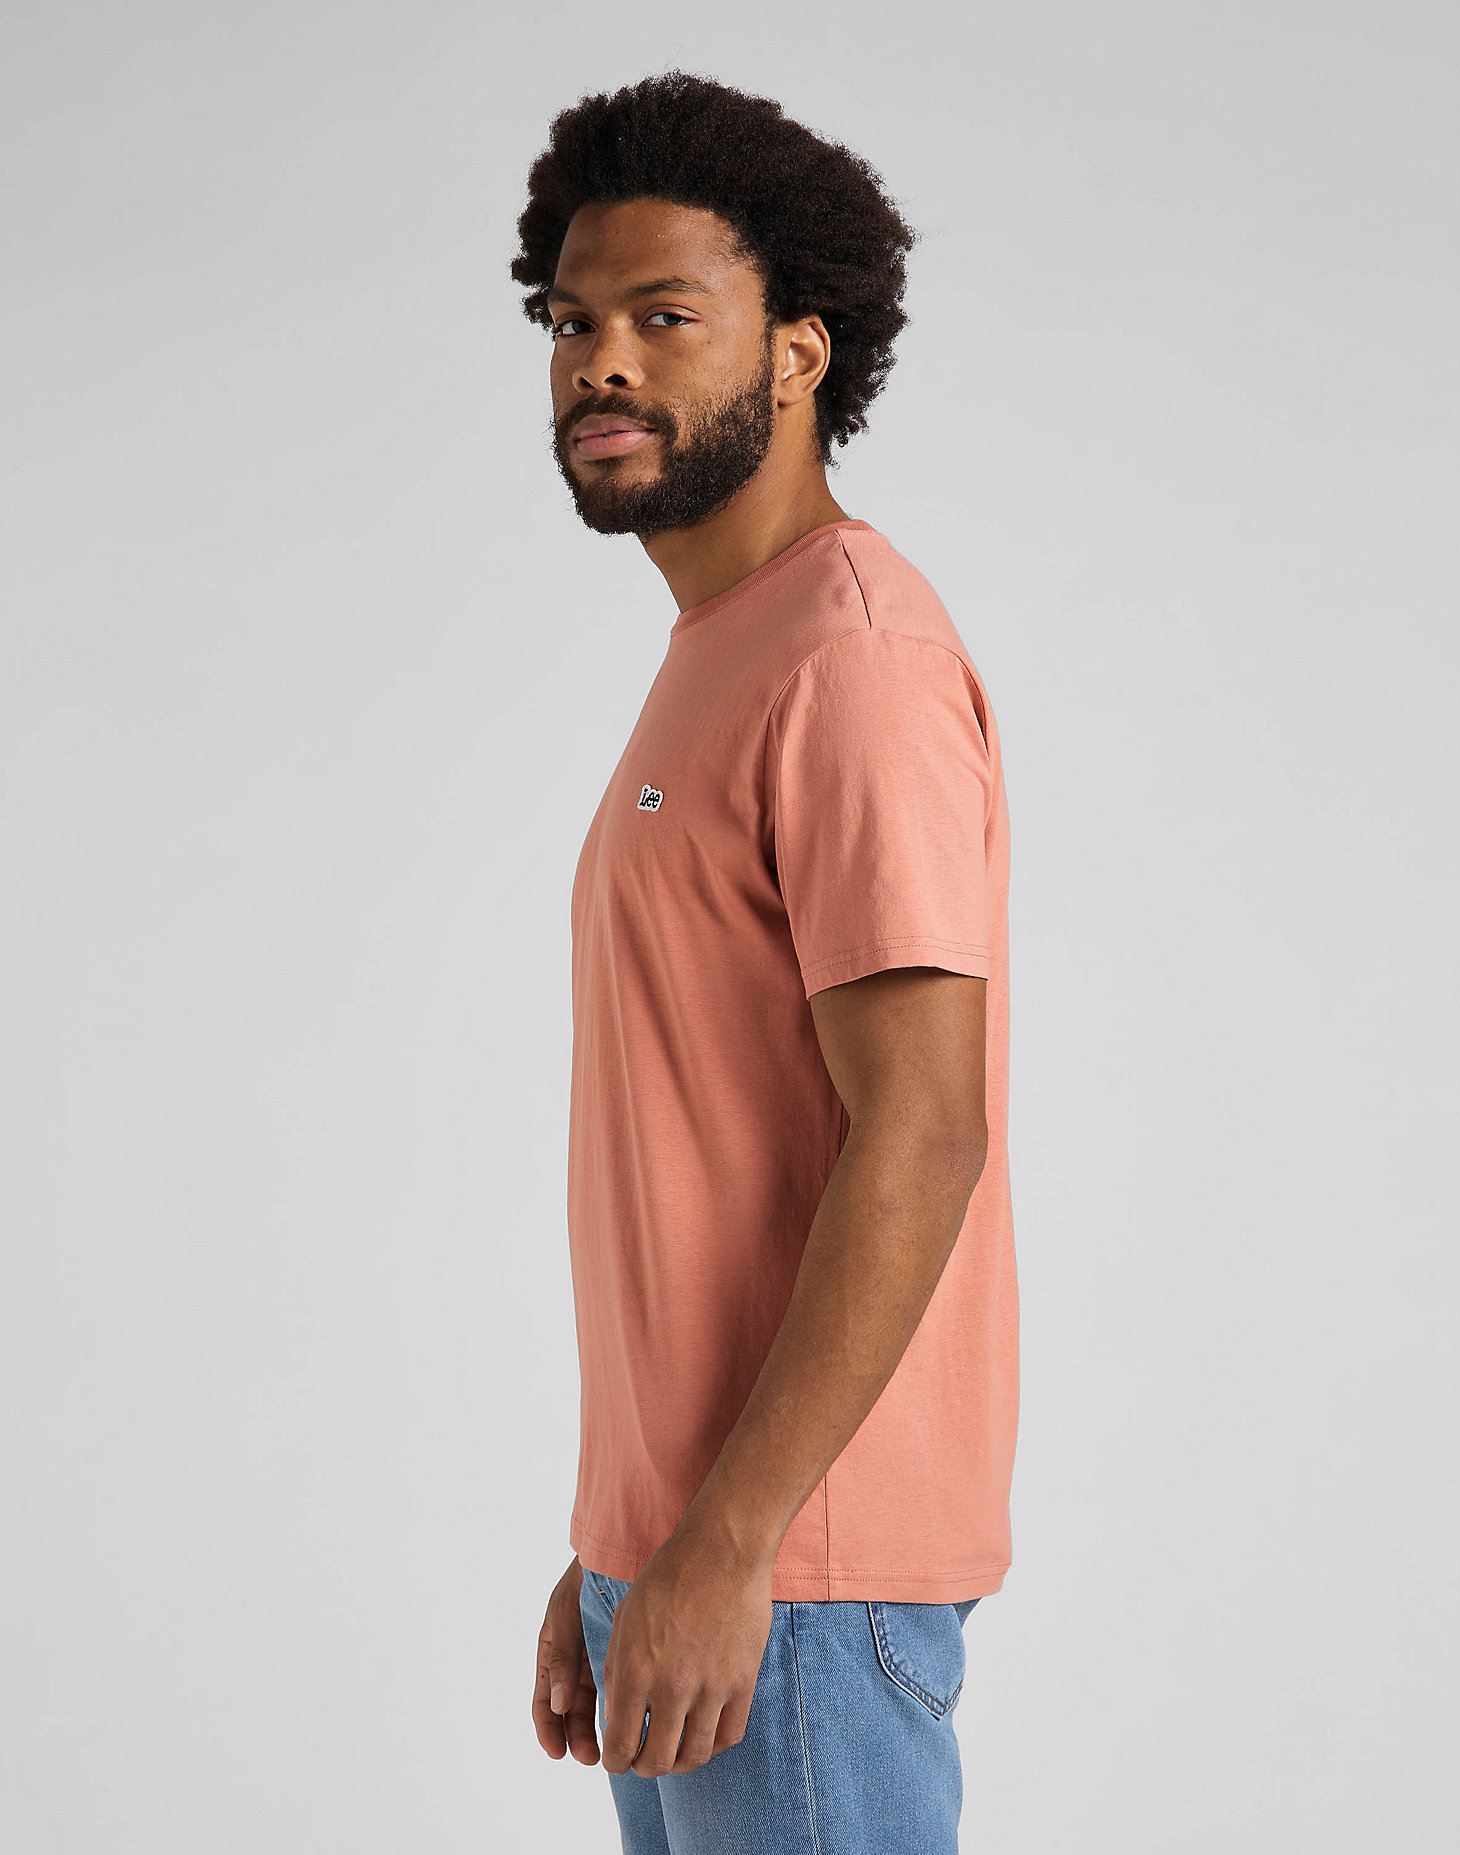 Patch Logo Tee in Rust alternative view 3